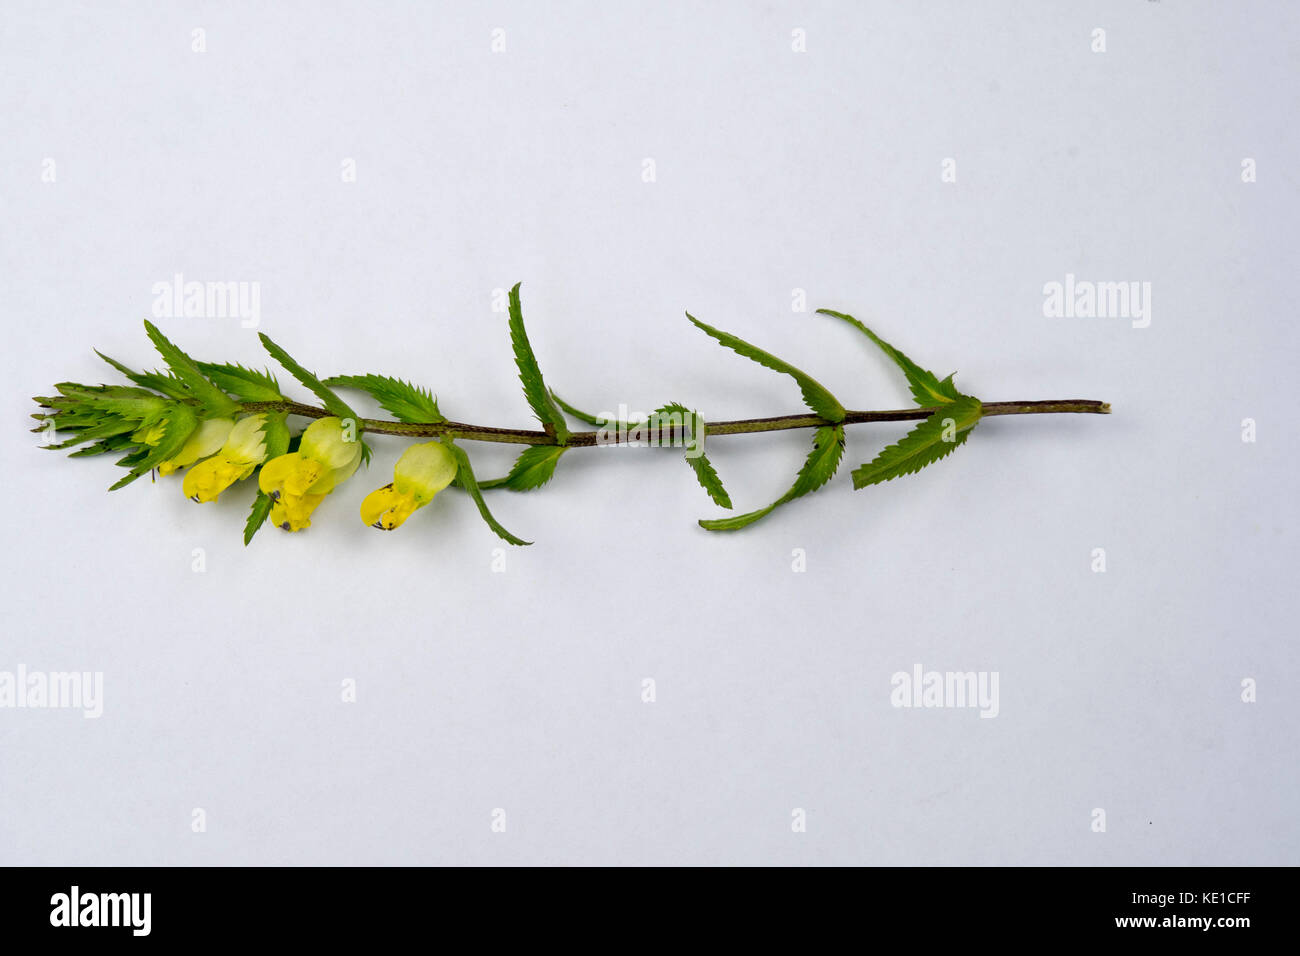 a single sprout with flowers from the semi-parasitic weed Rhinanthus angustifolius Stock Photo